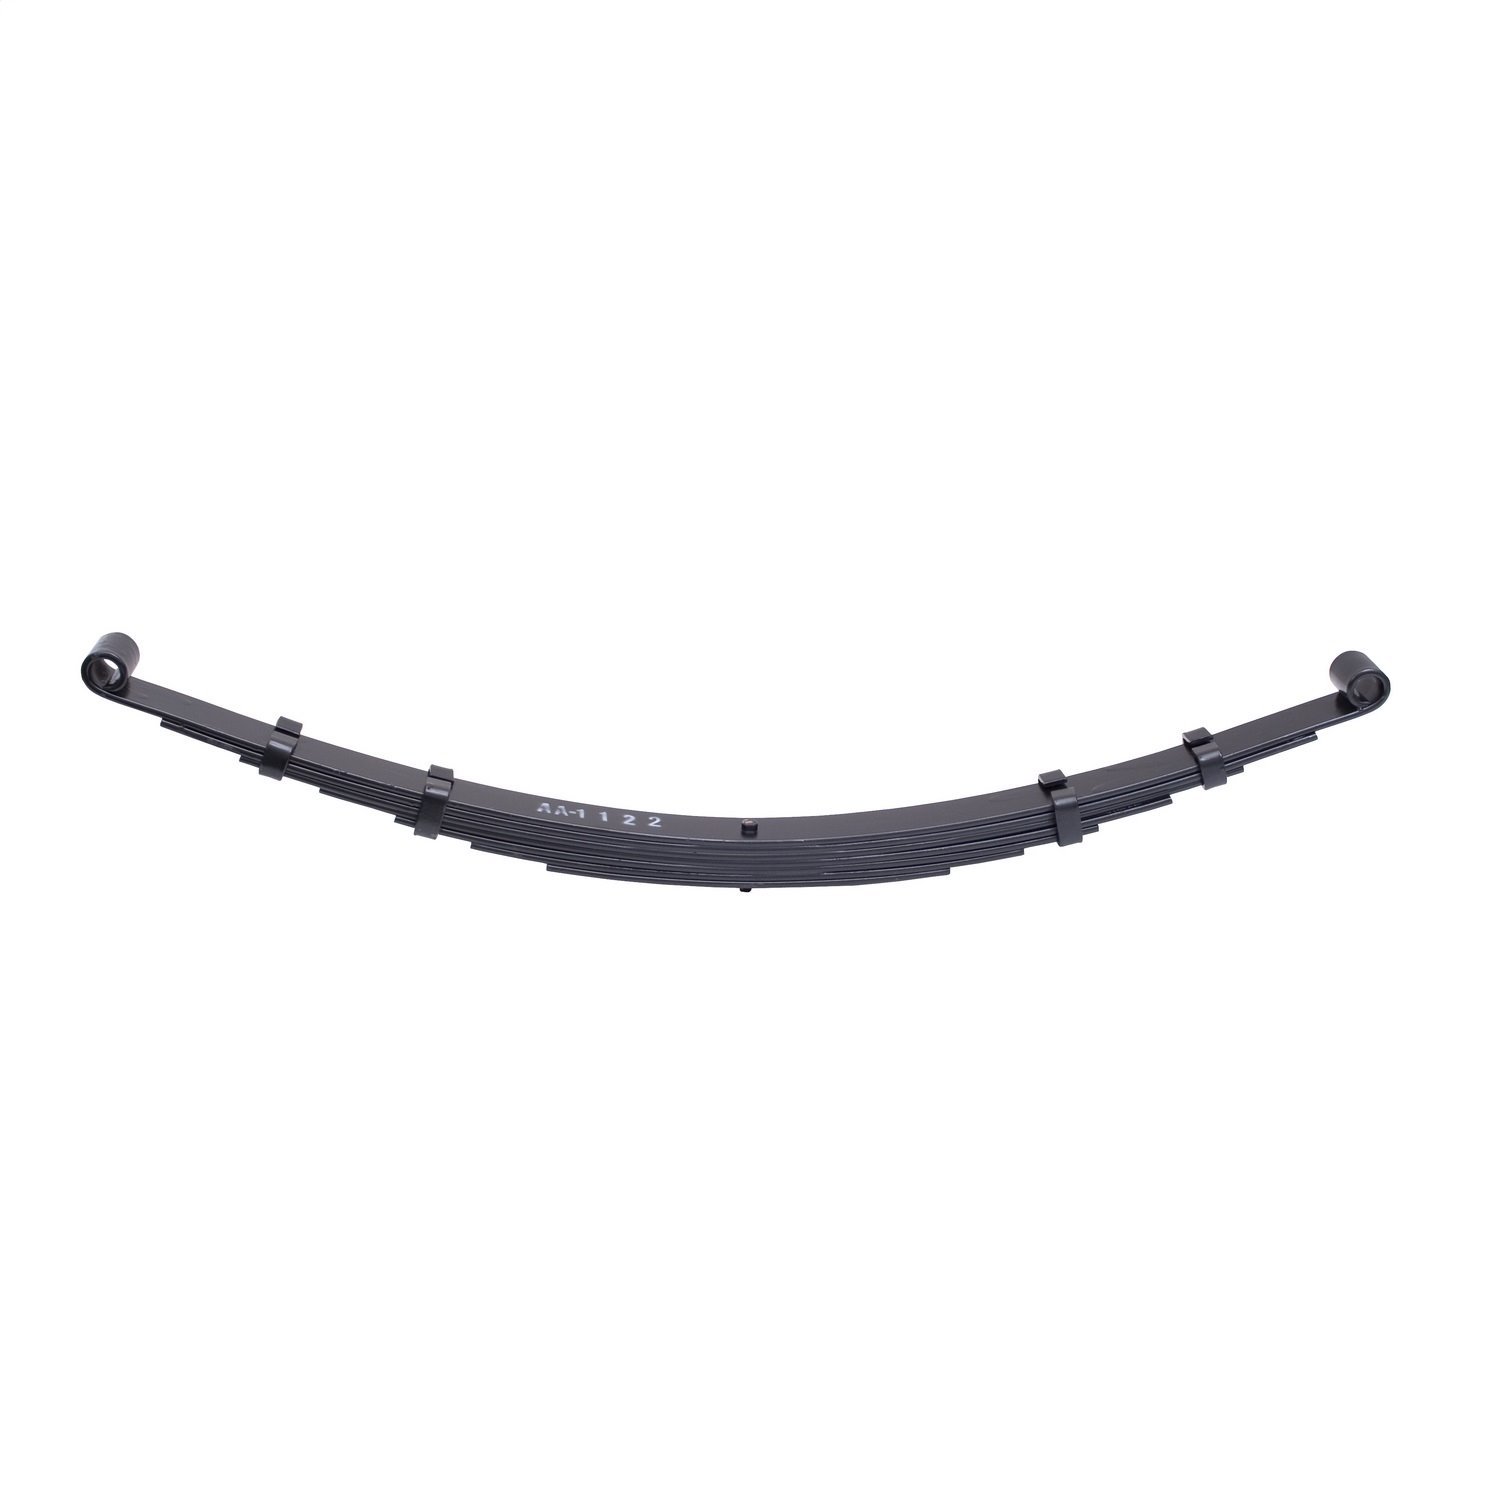 Replacement 7-leaf front leaf spring from Omix-ADA, Fits 55-75 Jeep CJ5 and Jeep CJ6, Fits left or right side.